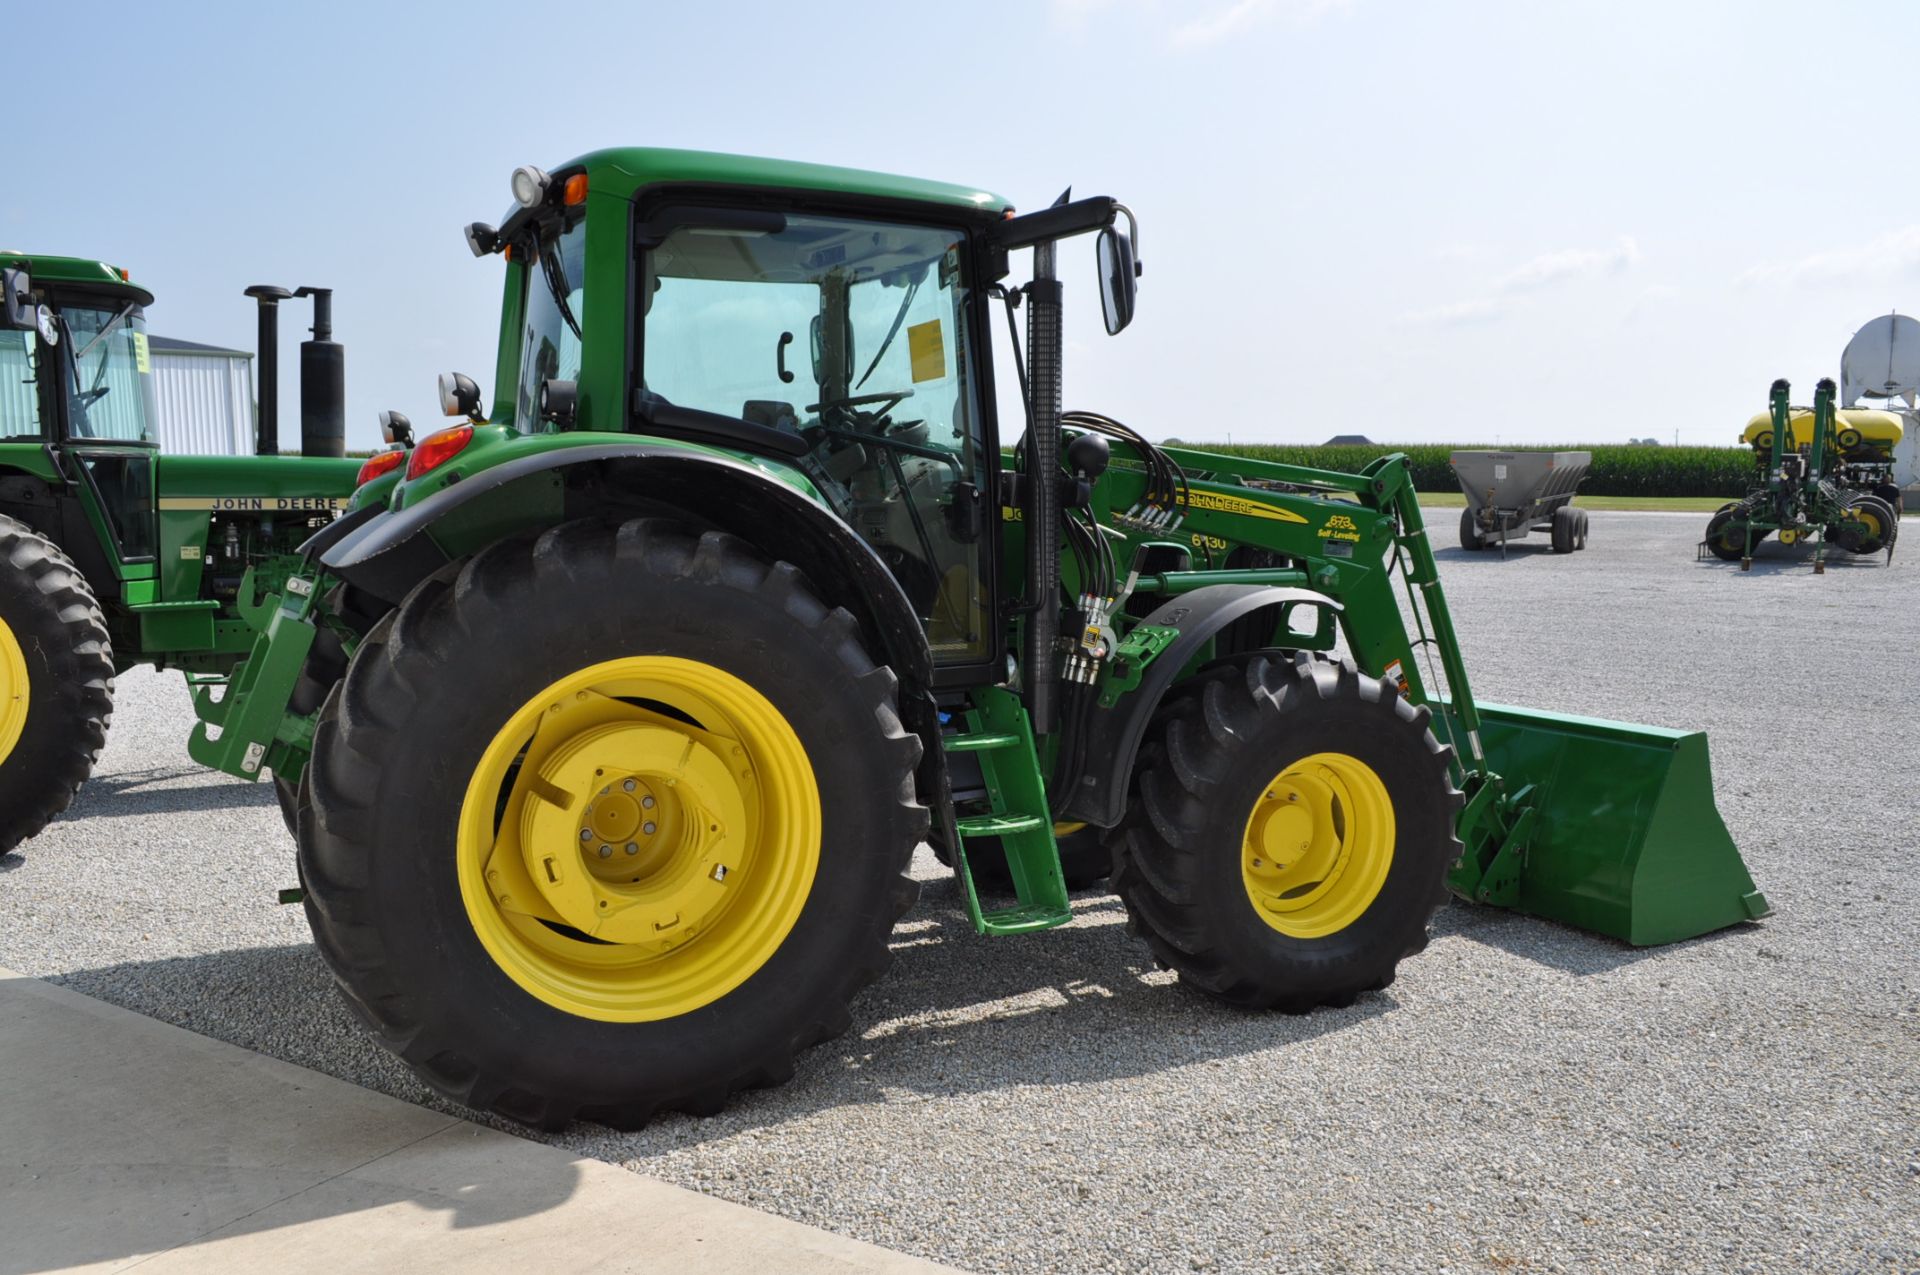 John Deere 6430 Premium tractor, MFWD, CHA, 600/65R38 rear, 540/65R24 front, IVT, front susp. - Image 4 of 18